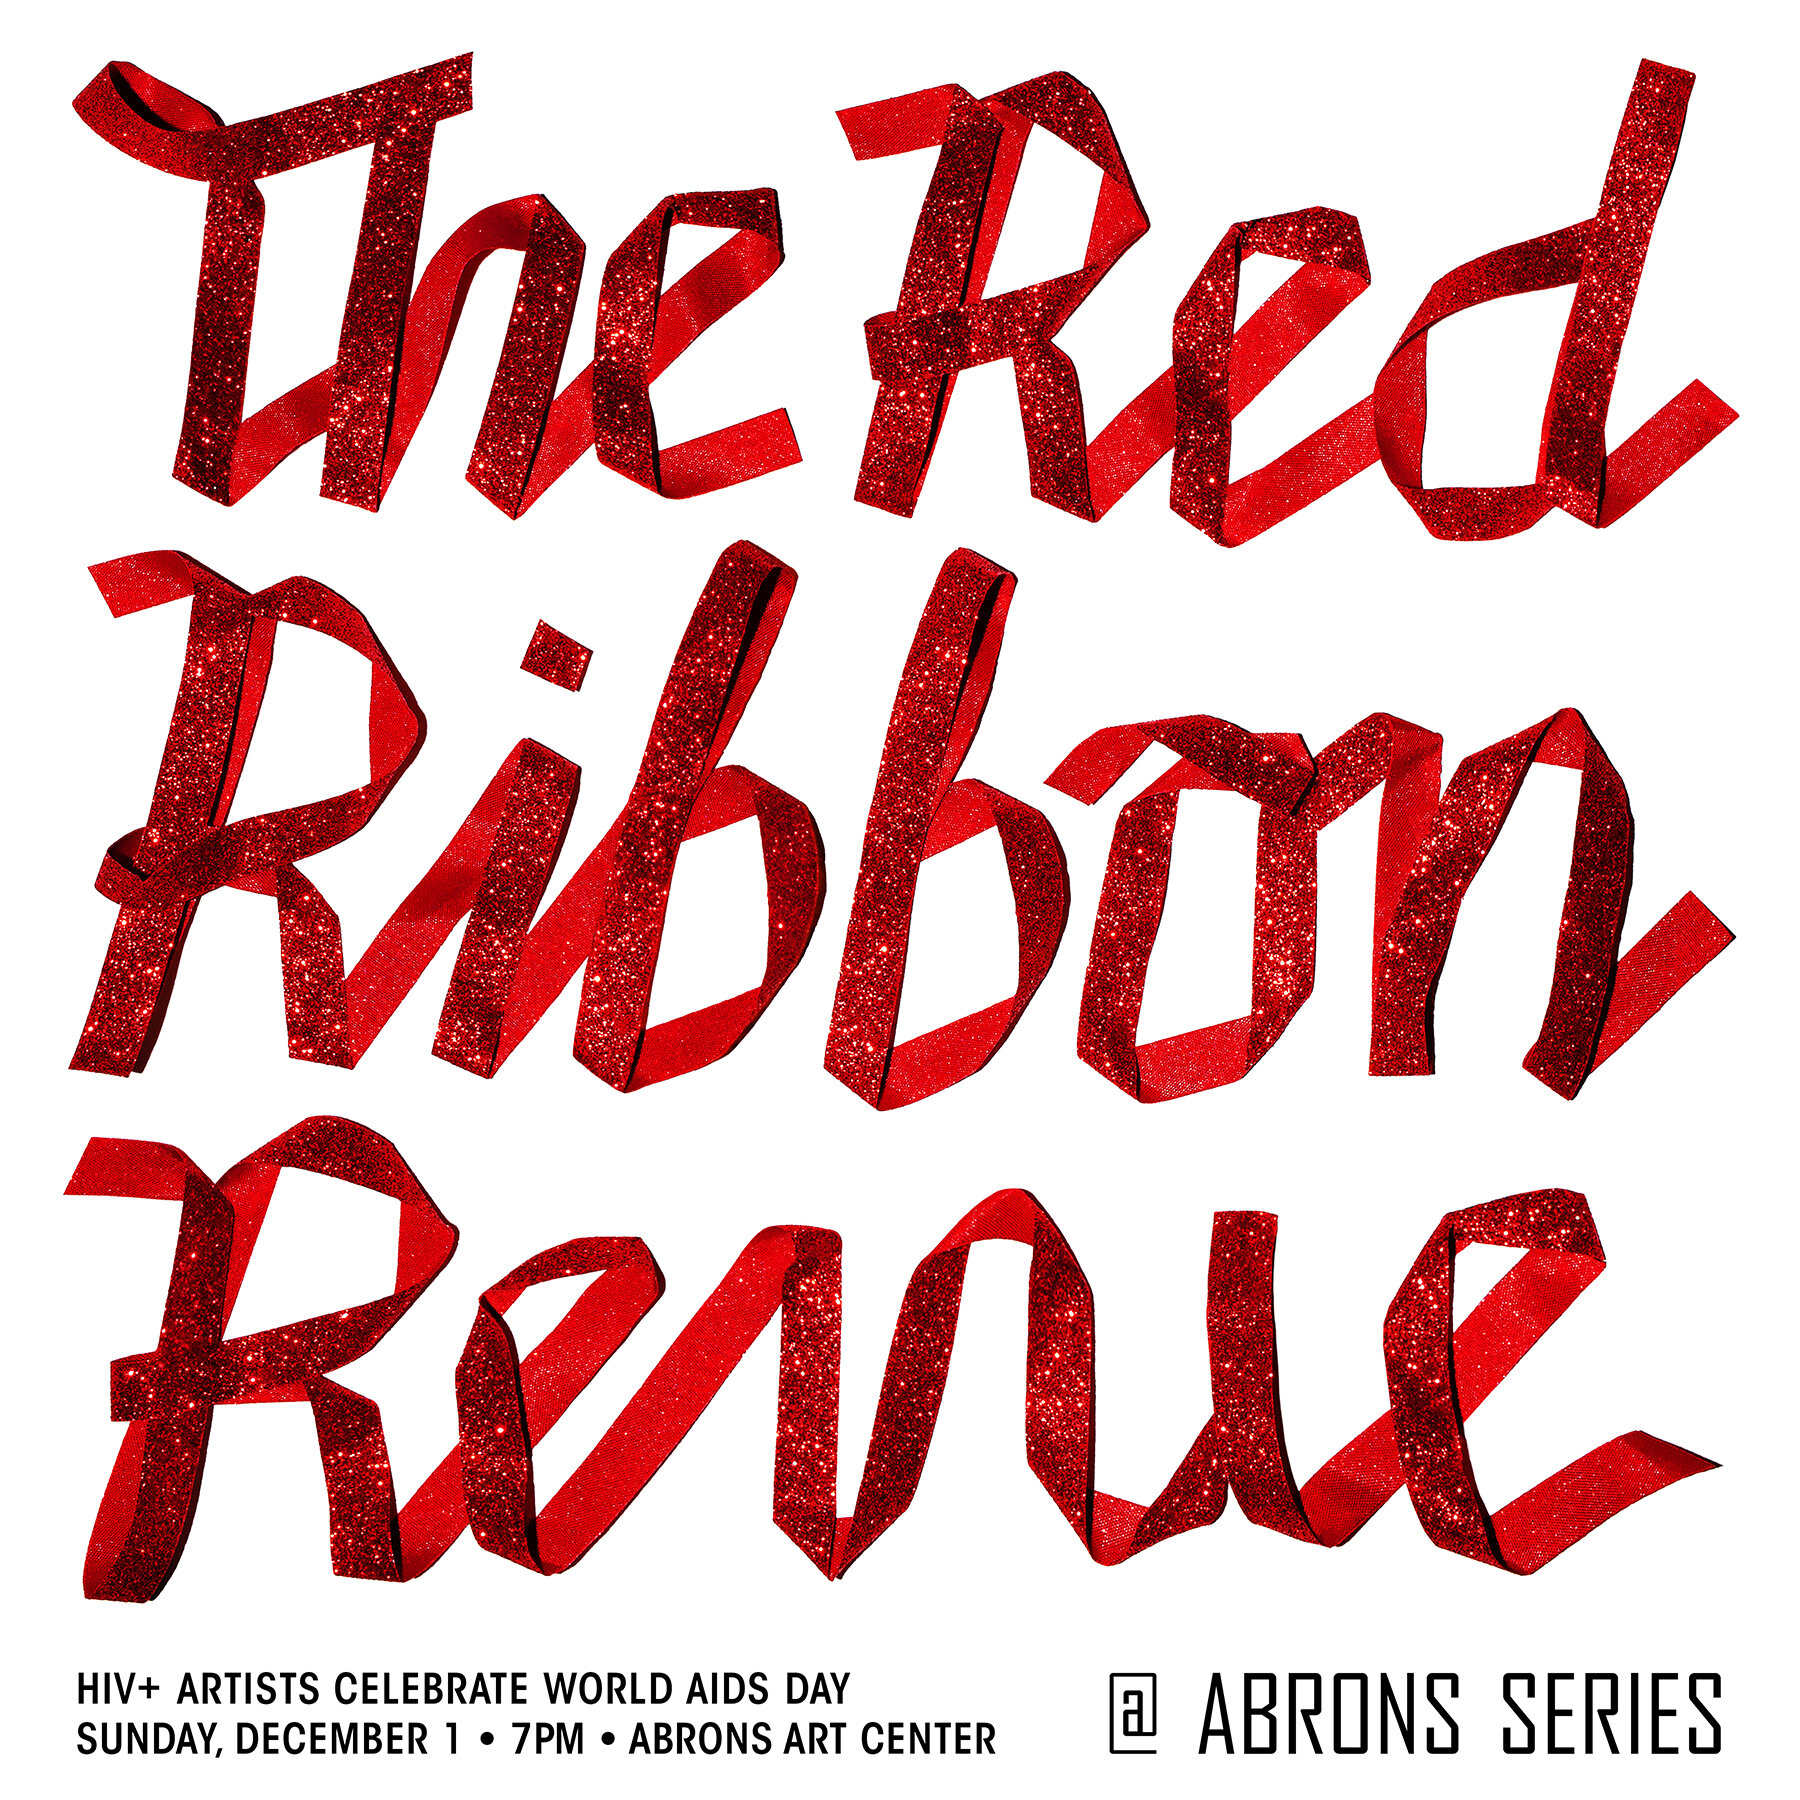 "The Red Ribbon Revue" show poster